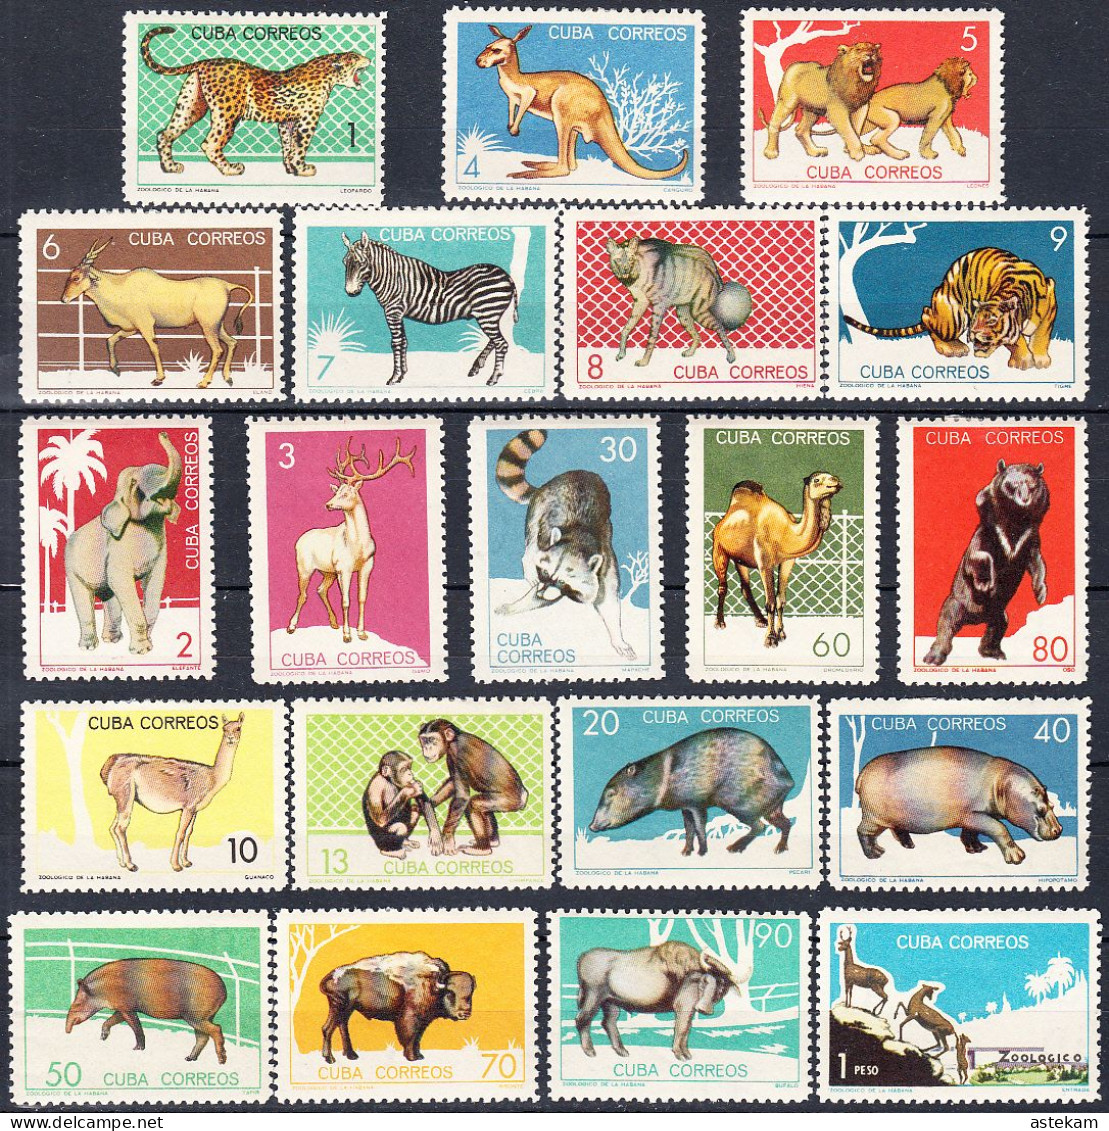 CUBA 1964, FAUNA, WILD ANIMALS From The HAVANA ZOO, COMPLETE MNH SERIES With ORIGINAL GLUE And PATCHES In GOOD QUALITY - Usados